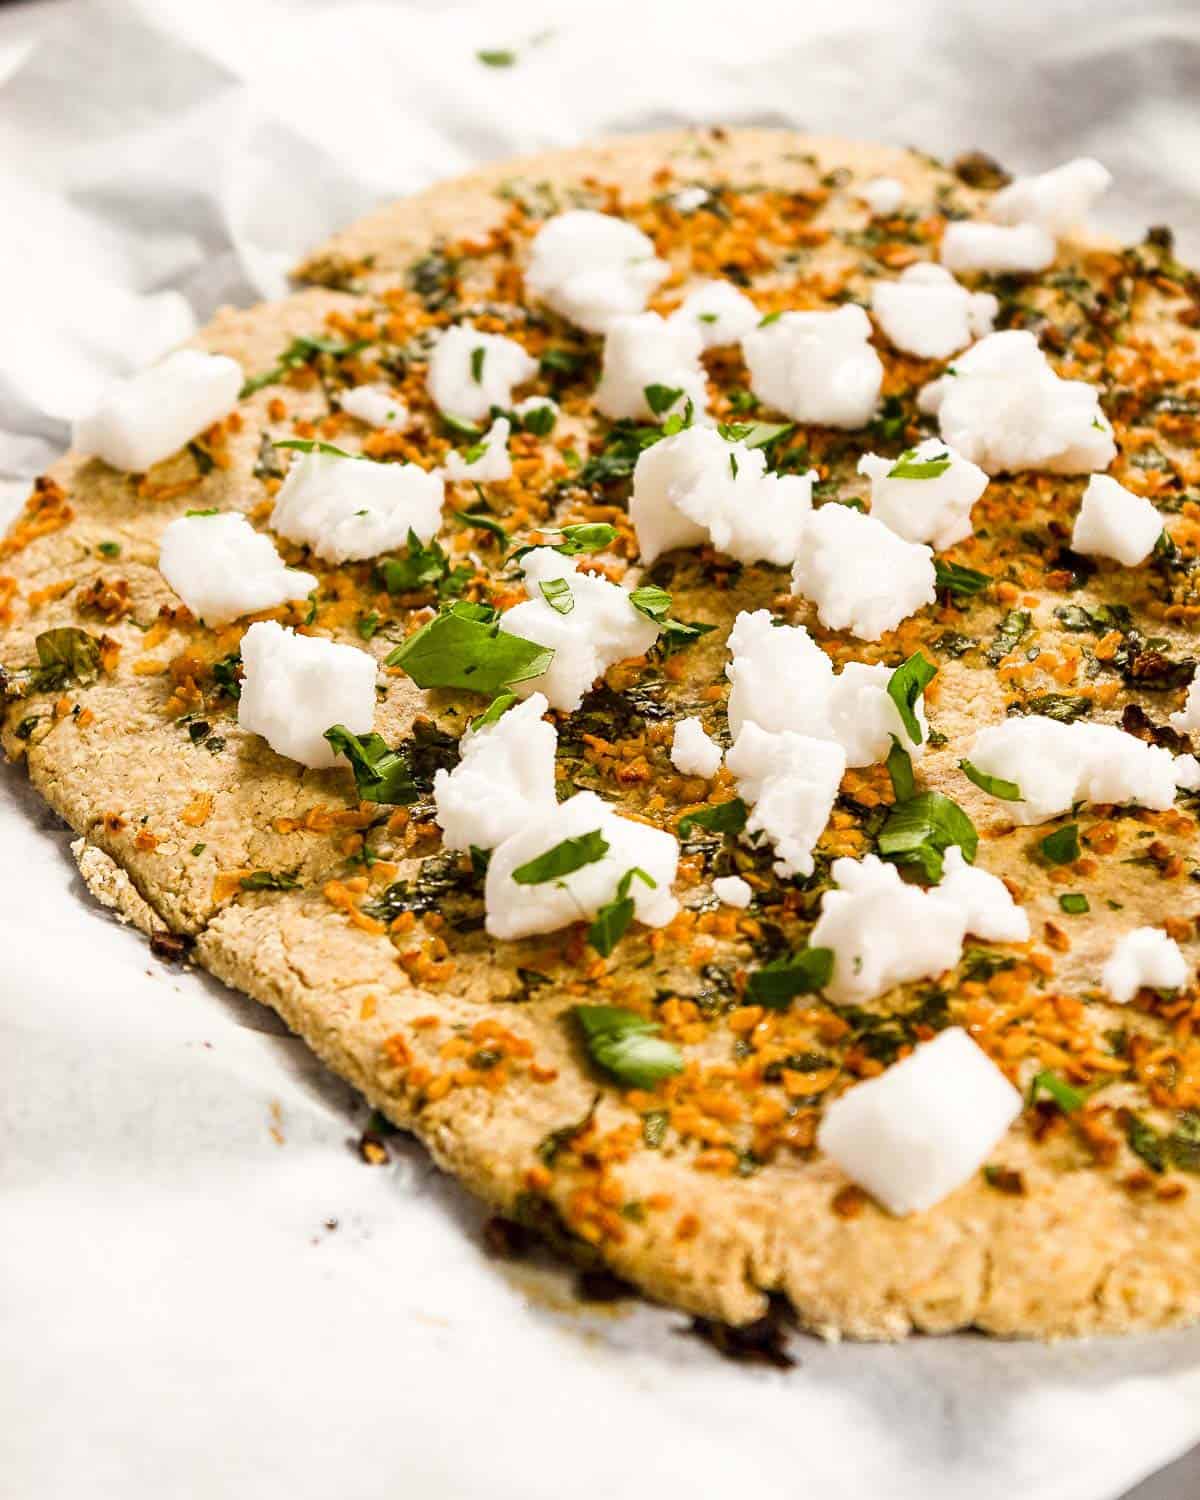 Thin crust pizza with garlic, parsley and feta.